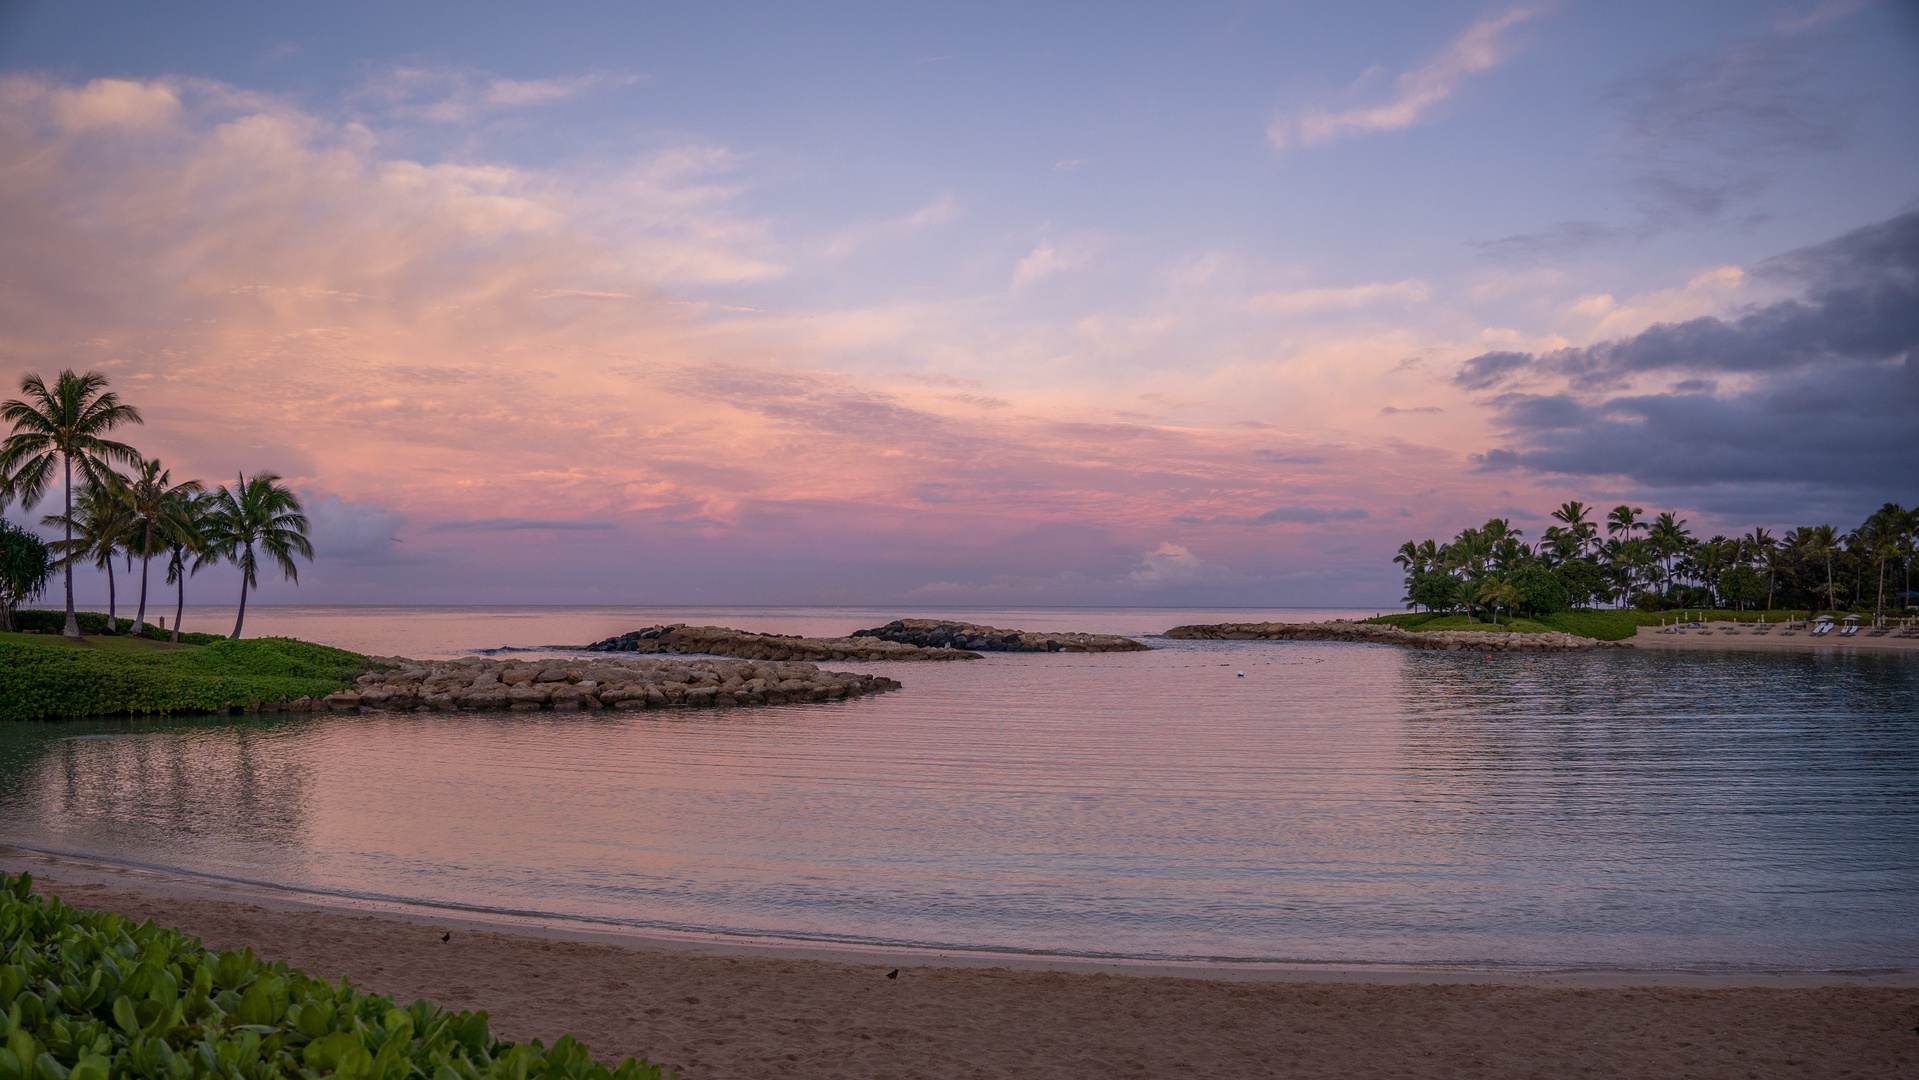 Kapolei Vacation Rentals, Coconut Plantation 1234-2 - Picturesque landscapes are every photographers dream at the beach.